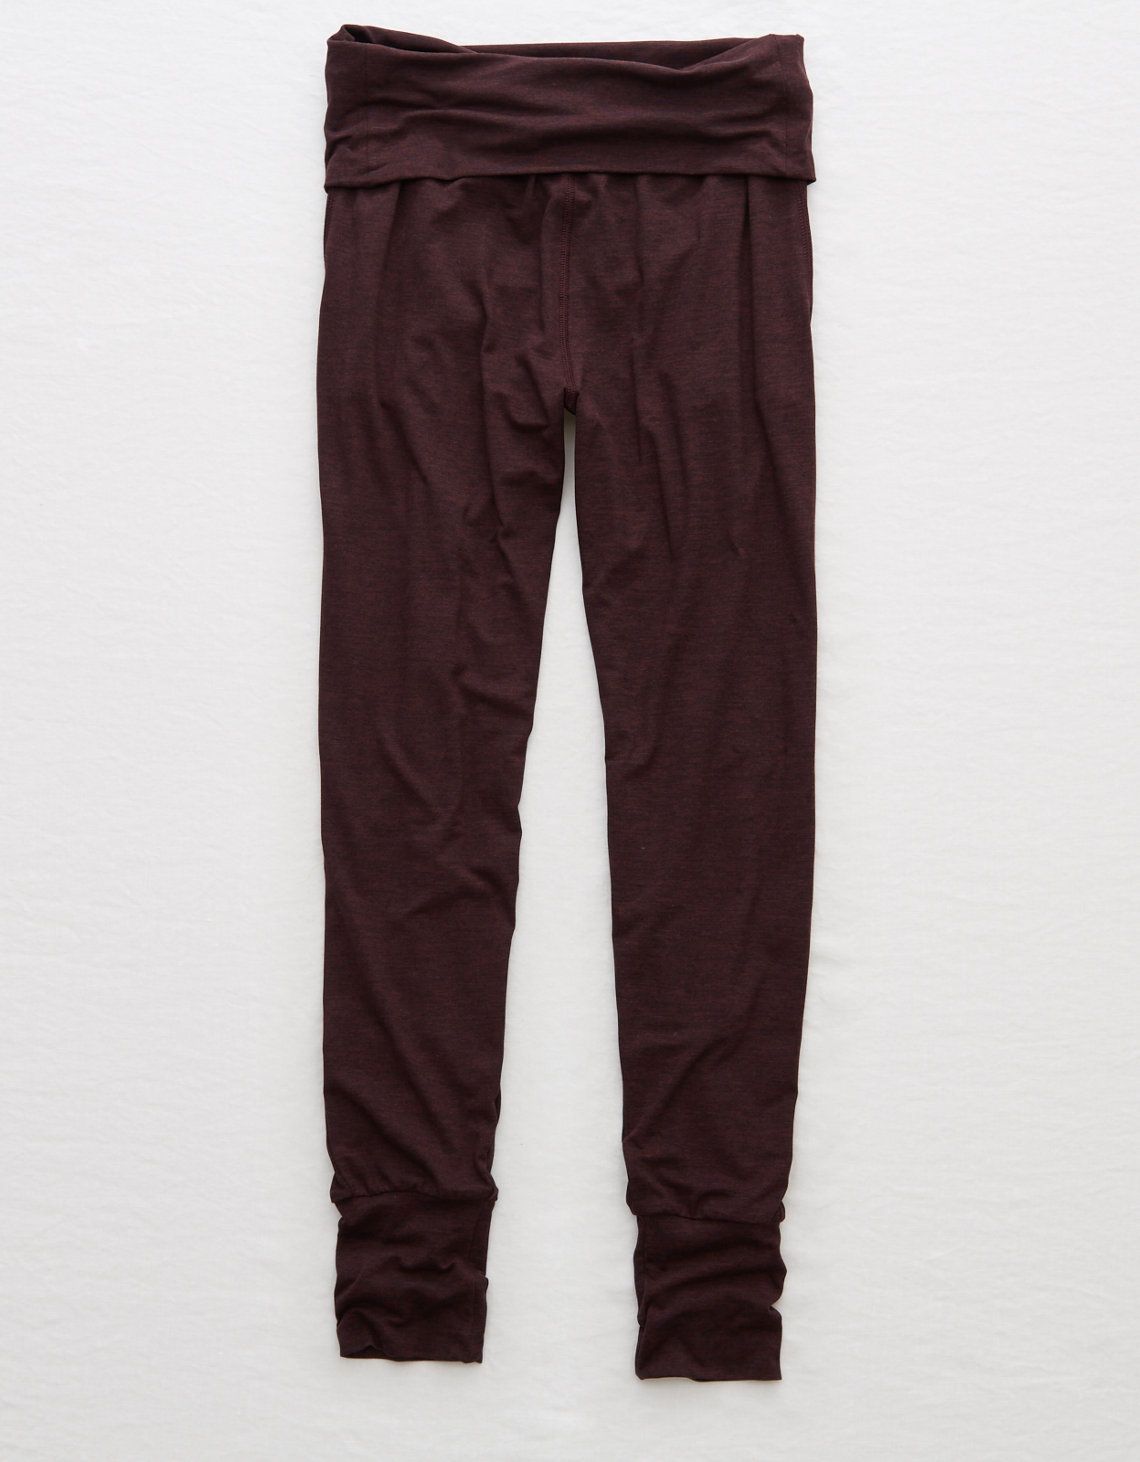 Aerie Real Soft? Jogger